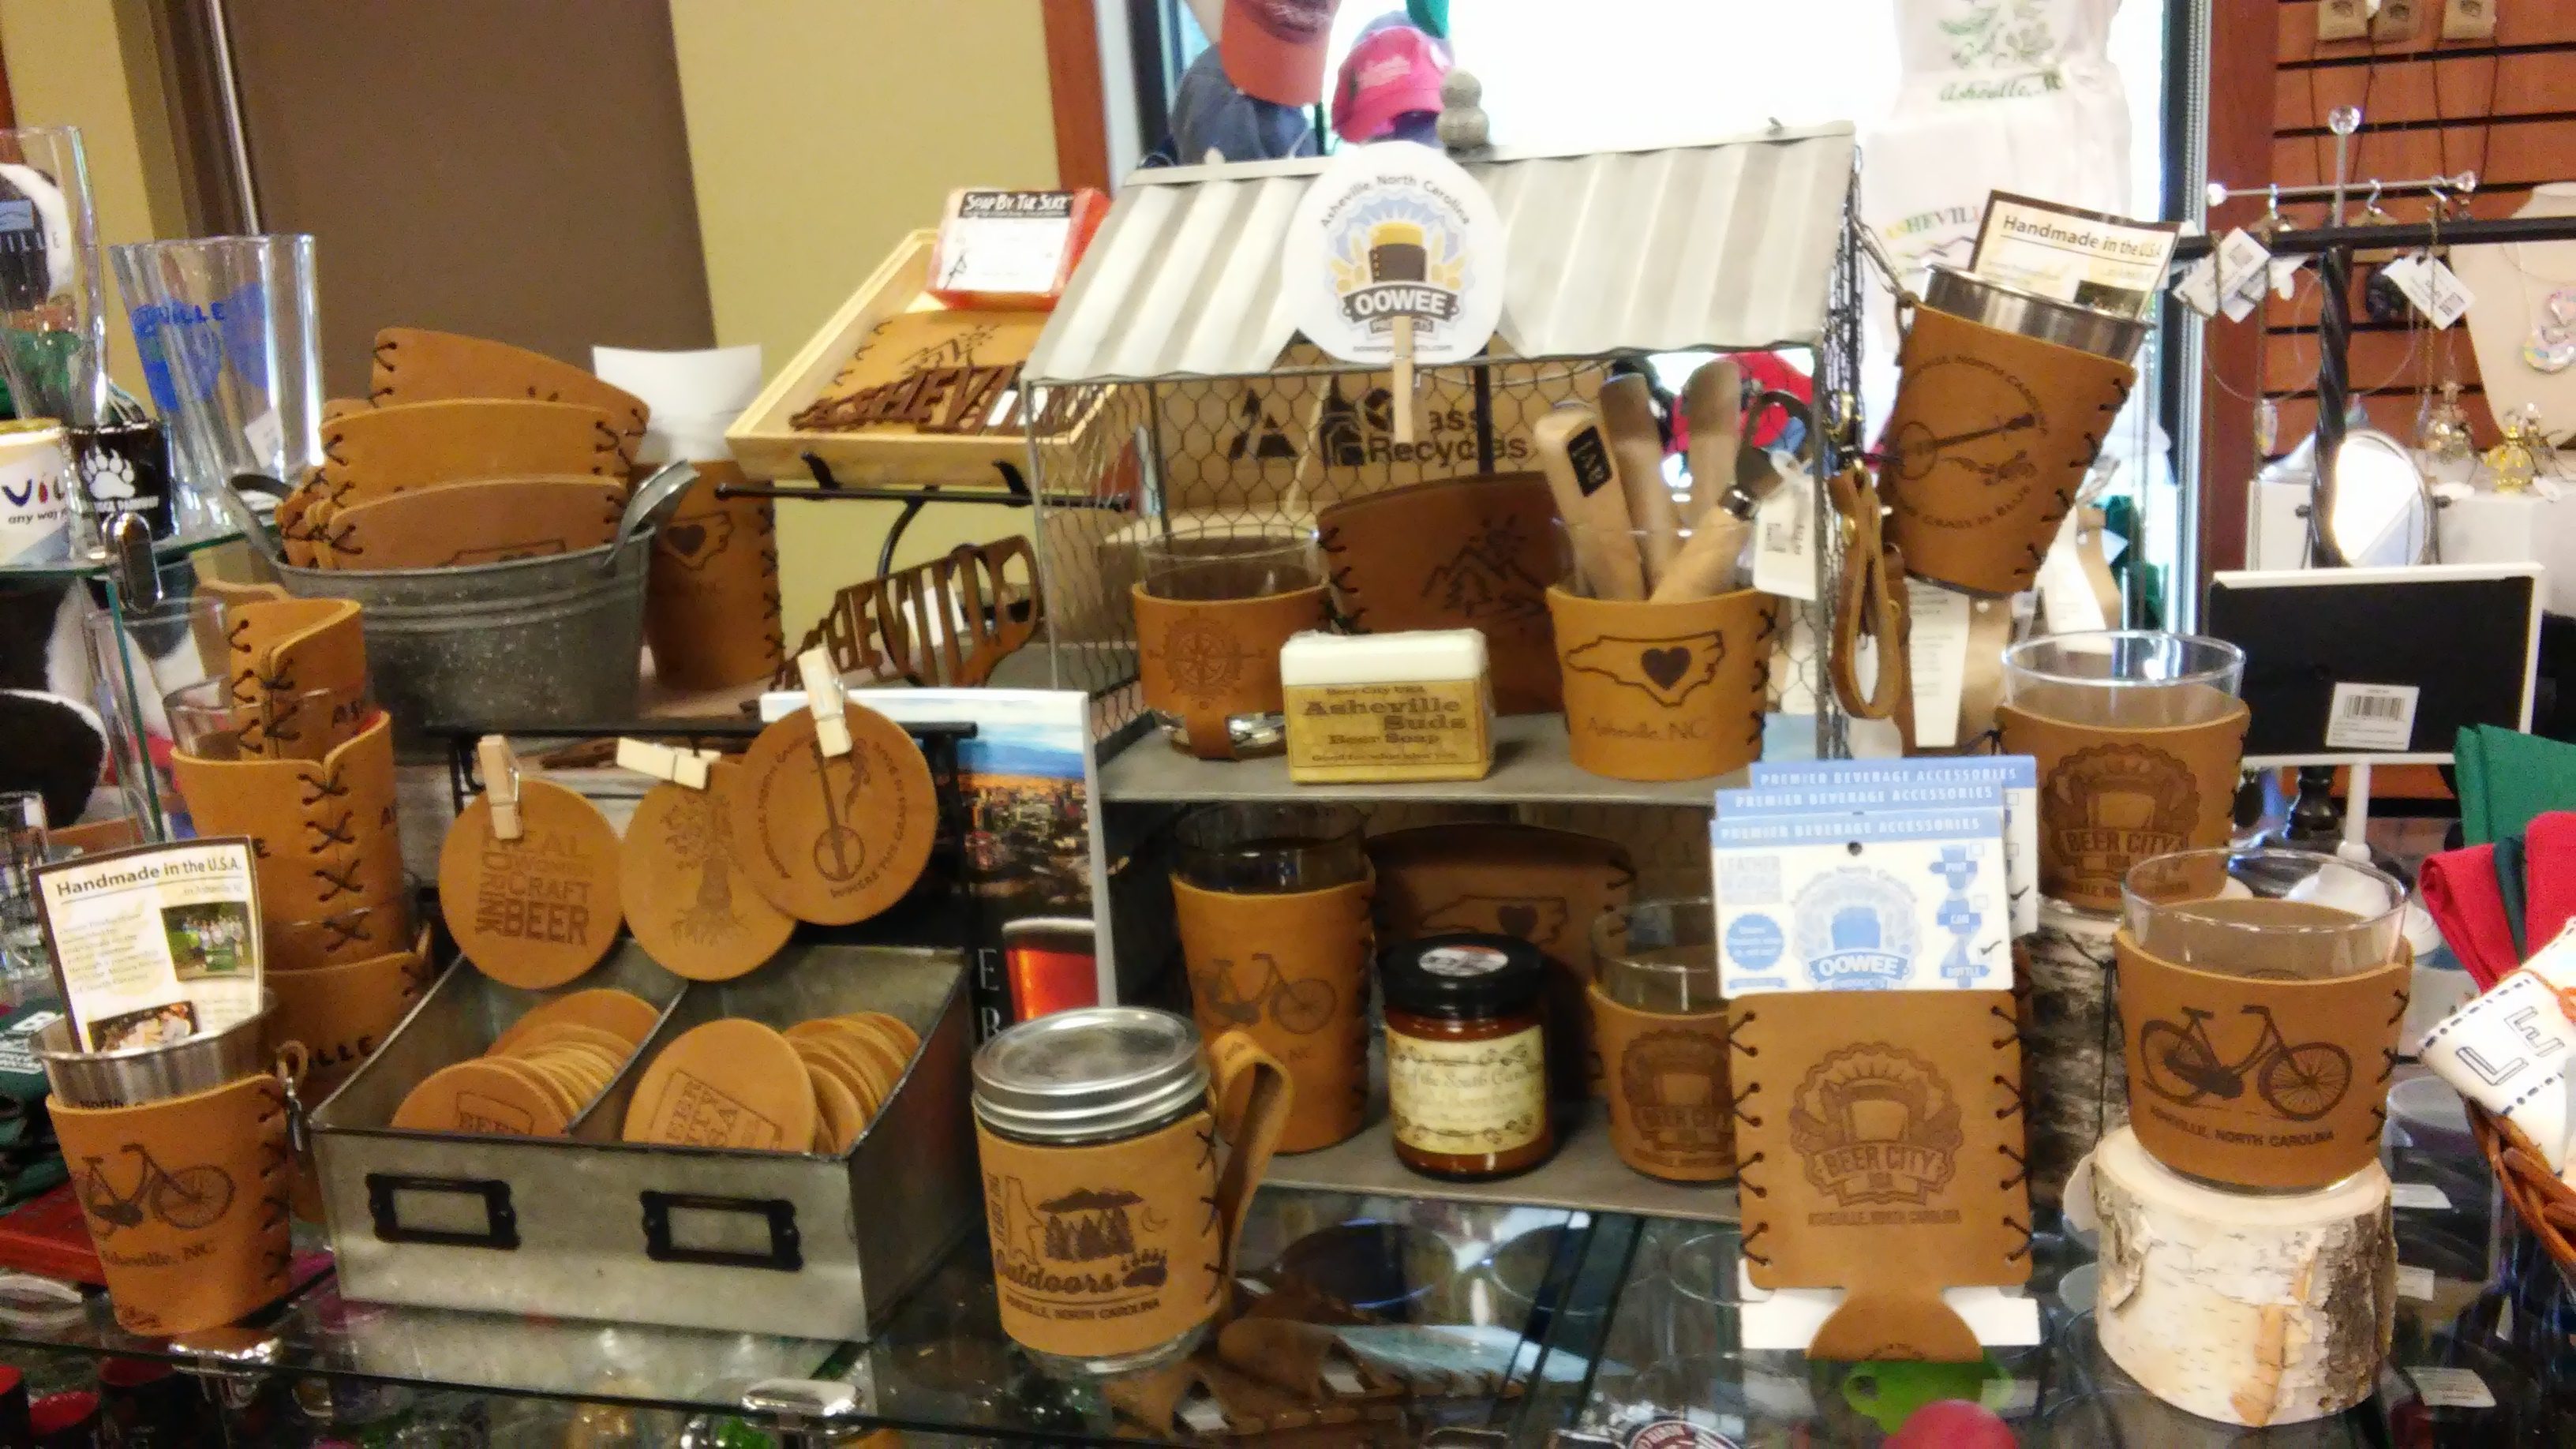 Oowee leather sleeve display at the Asheville chamber of commerce. 